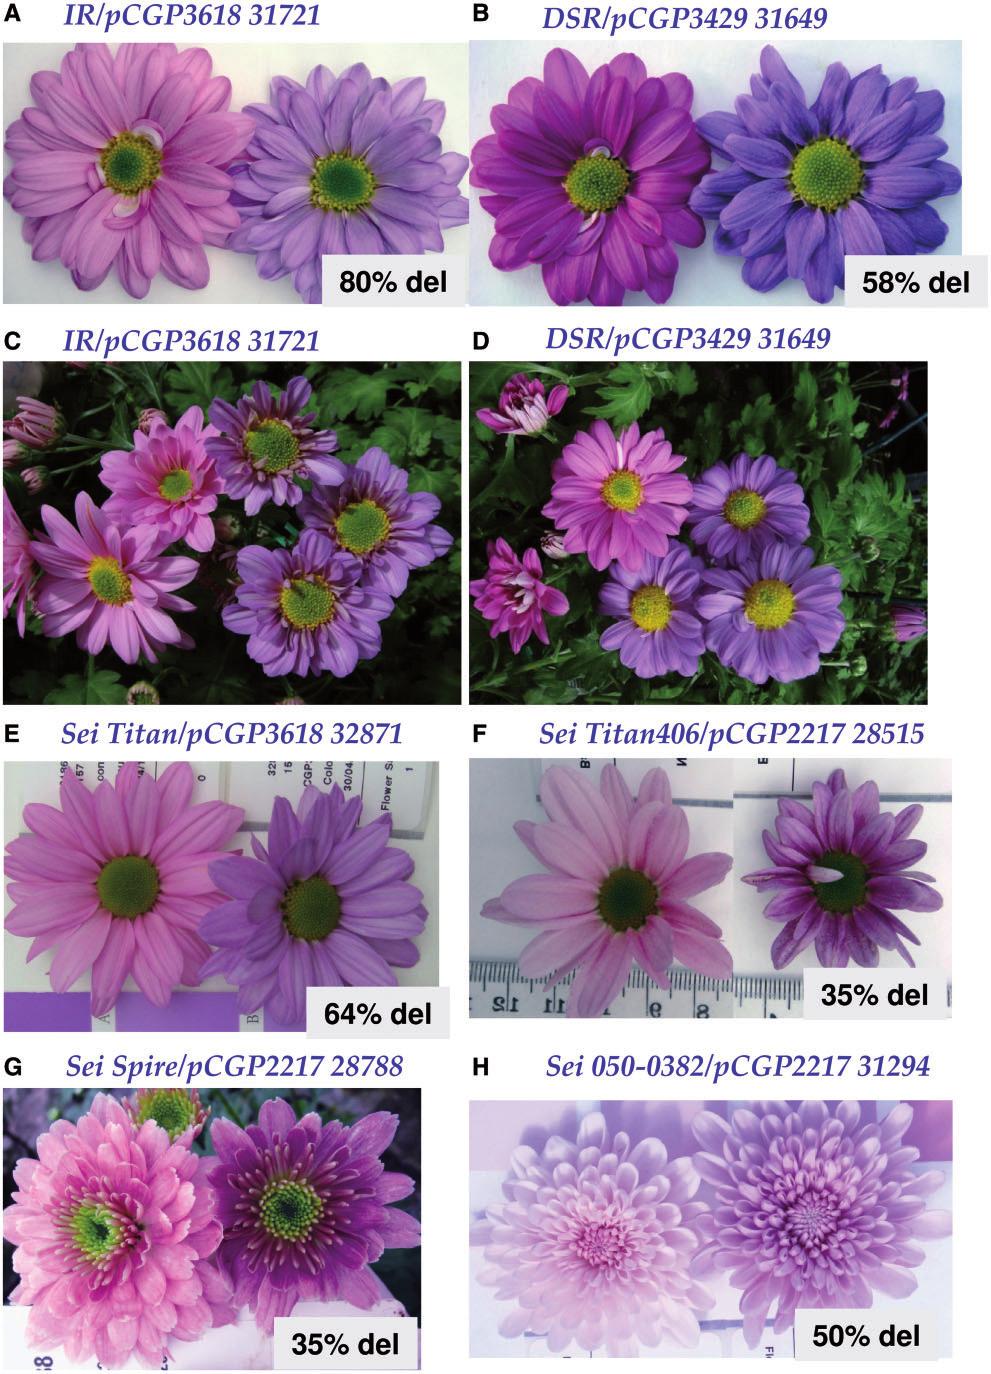 F. Brugliera et al. Fig. 5 Inflorescence color changes with the production of delphinidin-based anthocyanins (A H). The host is on the left and the transgenic on the right.